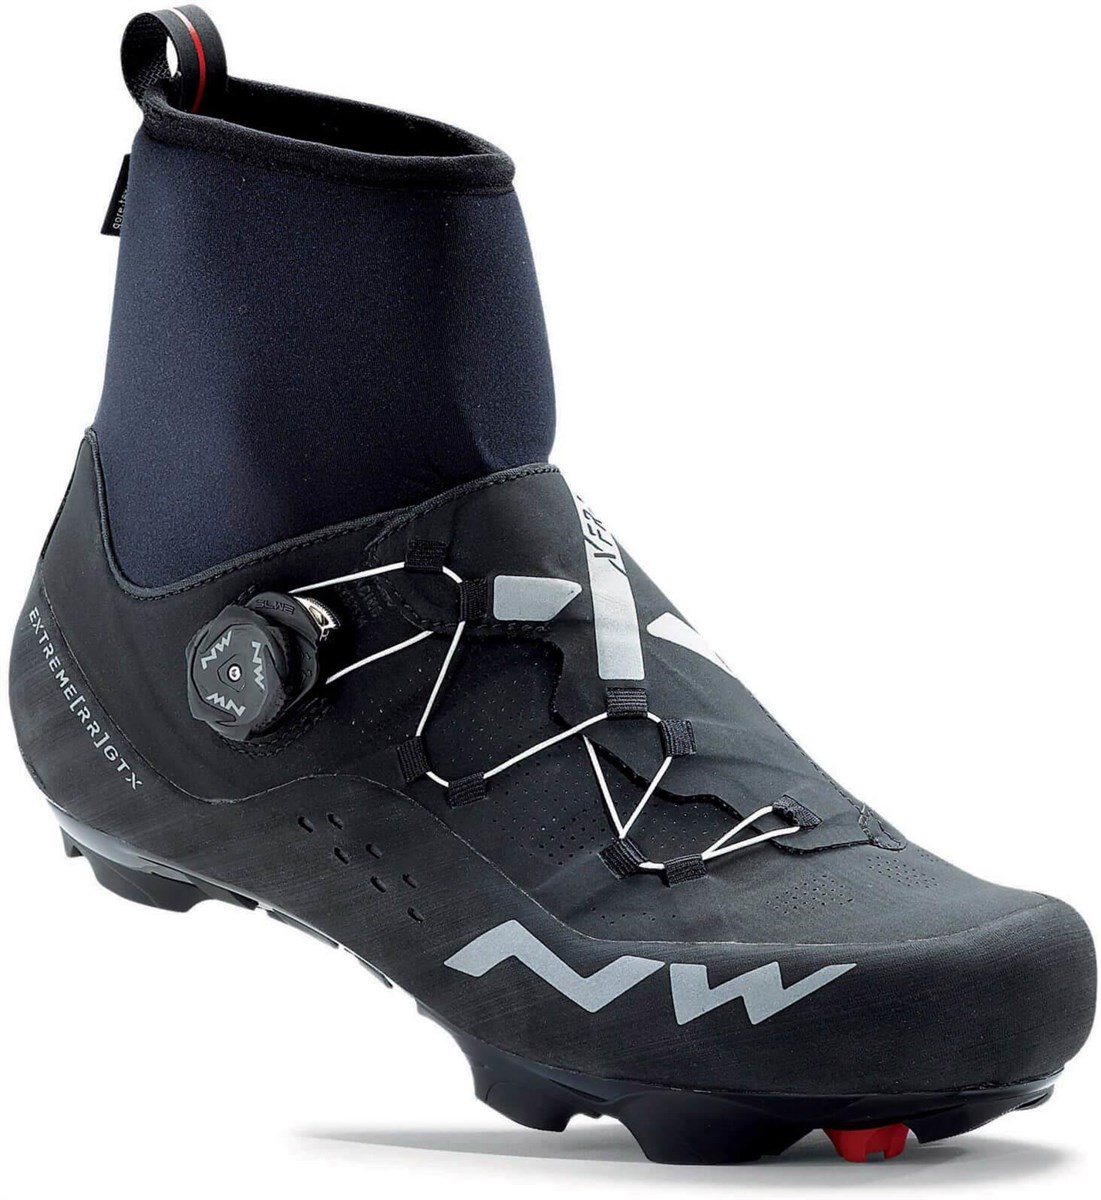 Northwave Extreme XCM GTX Winter SPD MTB Shoes product image